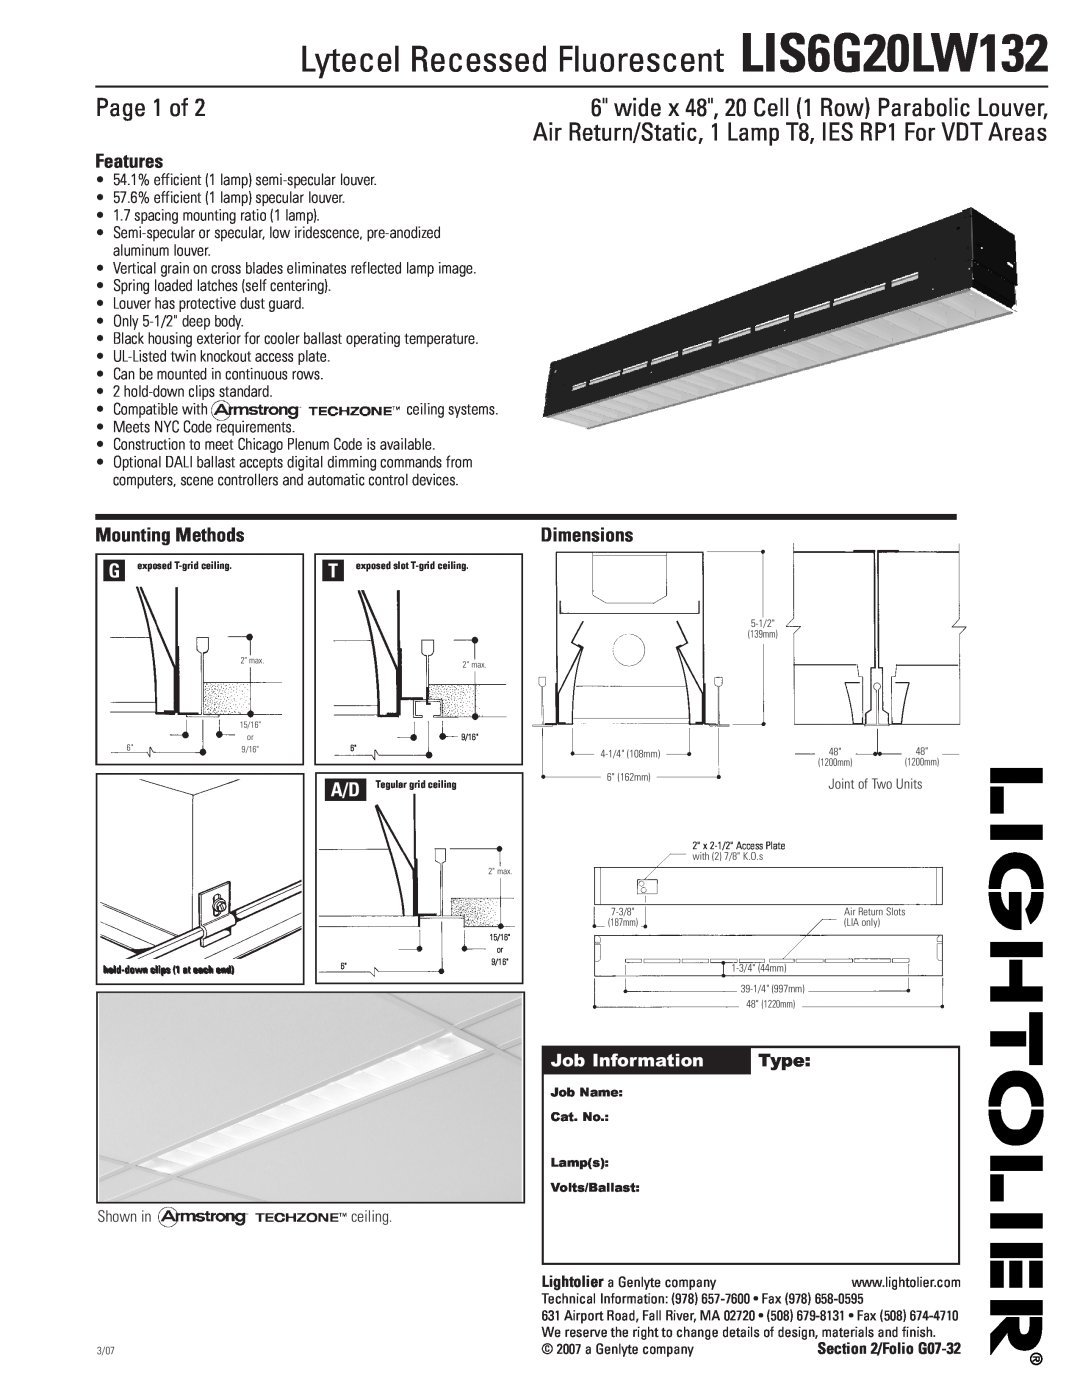 Lightolier dimensions Lytecel Recessed Fluorescent LIS6G20LW132, Page 1 of, Features, Mounting Methods, Dimensions 